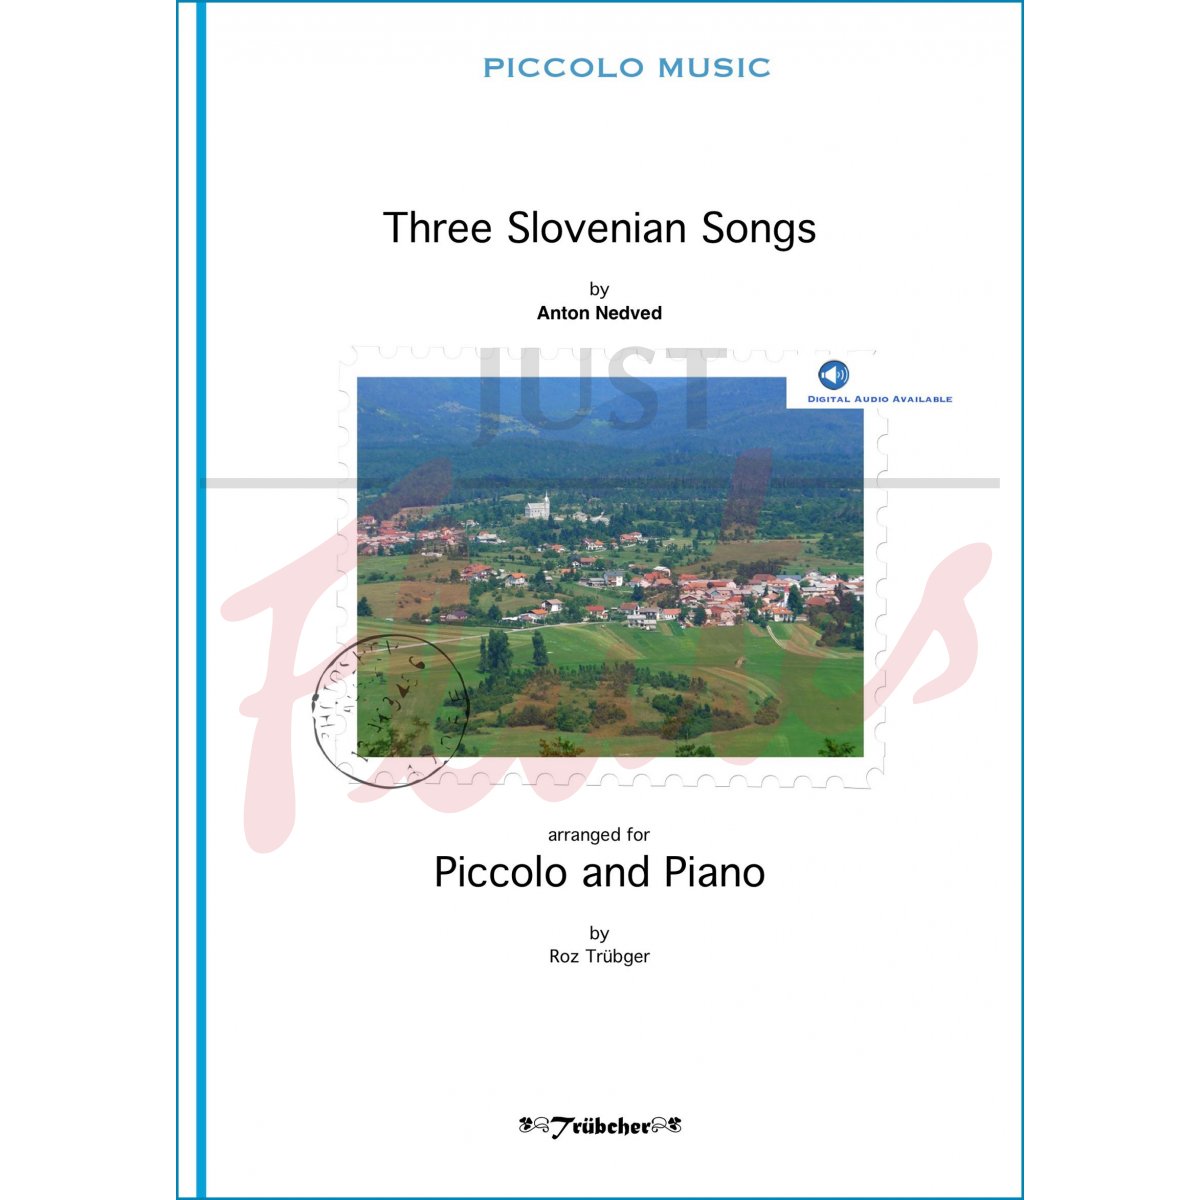 Three Slovenian Songs for Piccolo and Piano